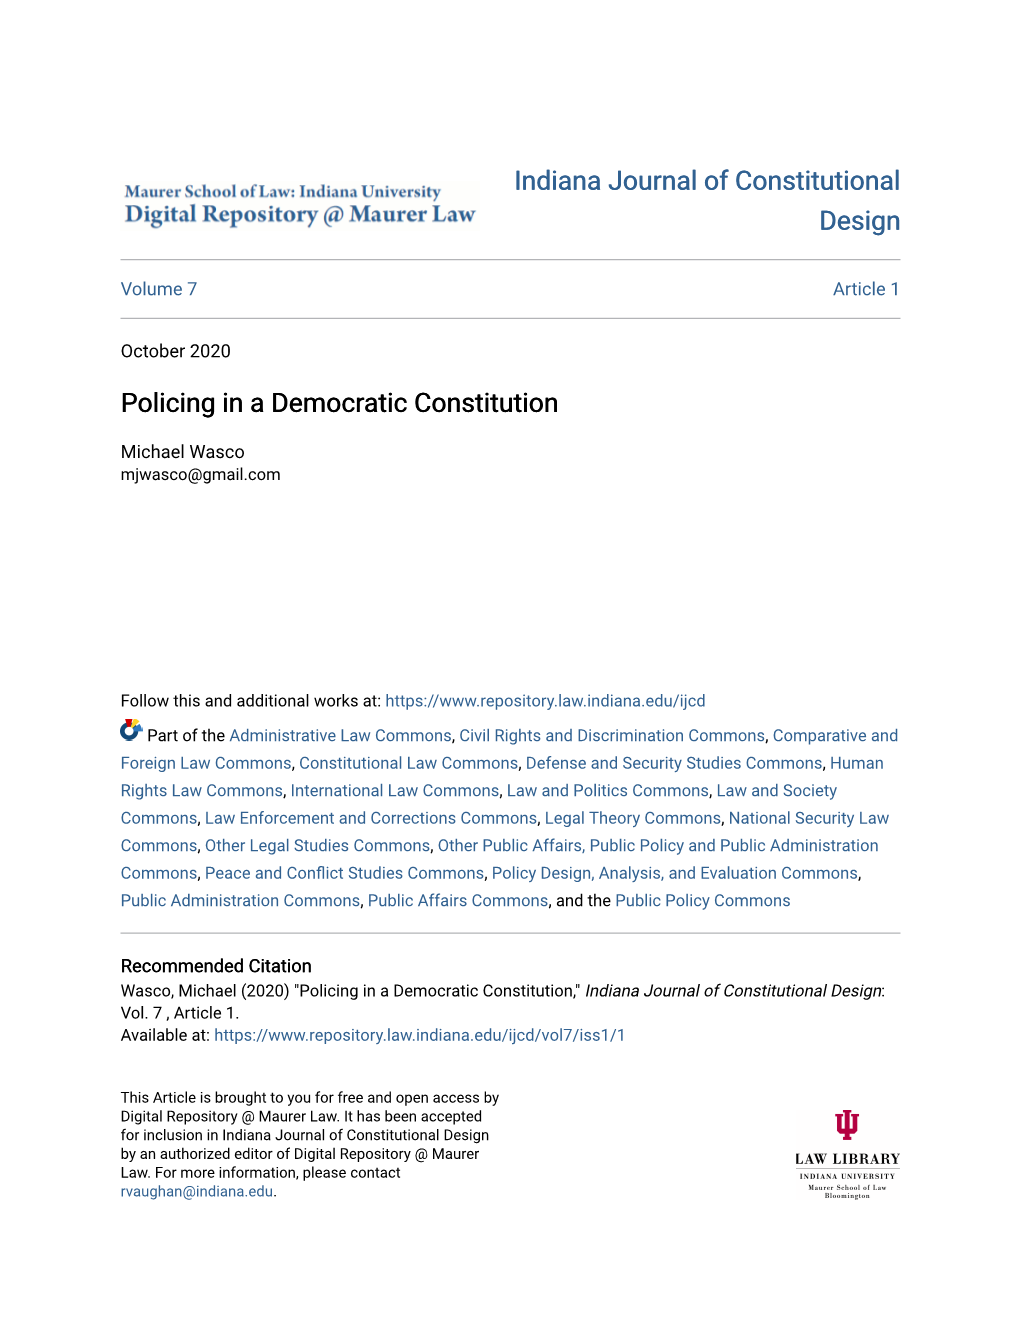 Policing in a Democratic Constitution